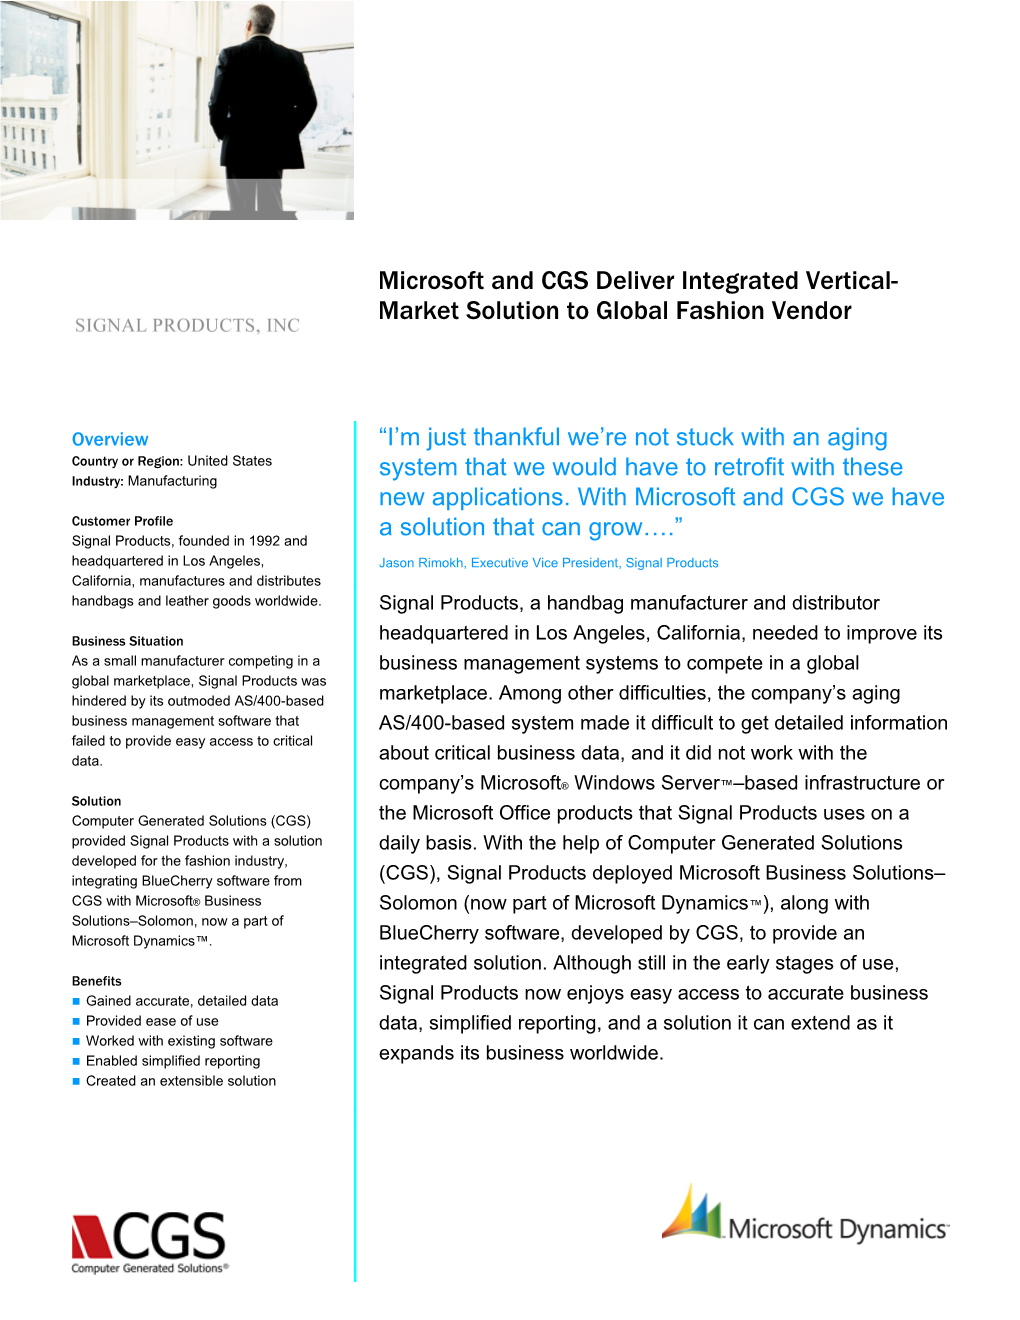 Microsoft and CGS Deliver Integrated Vertical-Market Solution to Global Fashion Vendor